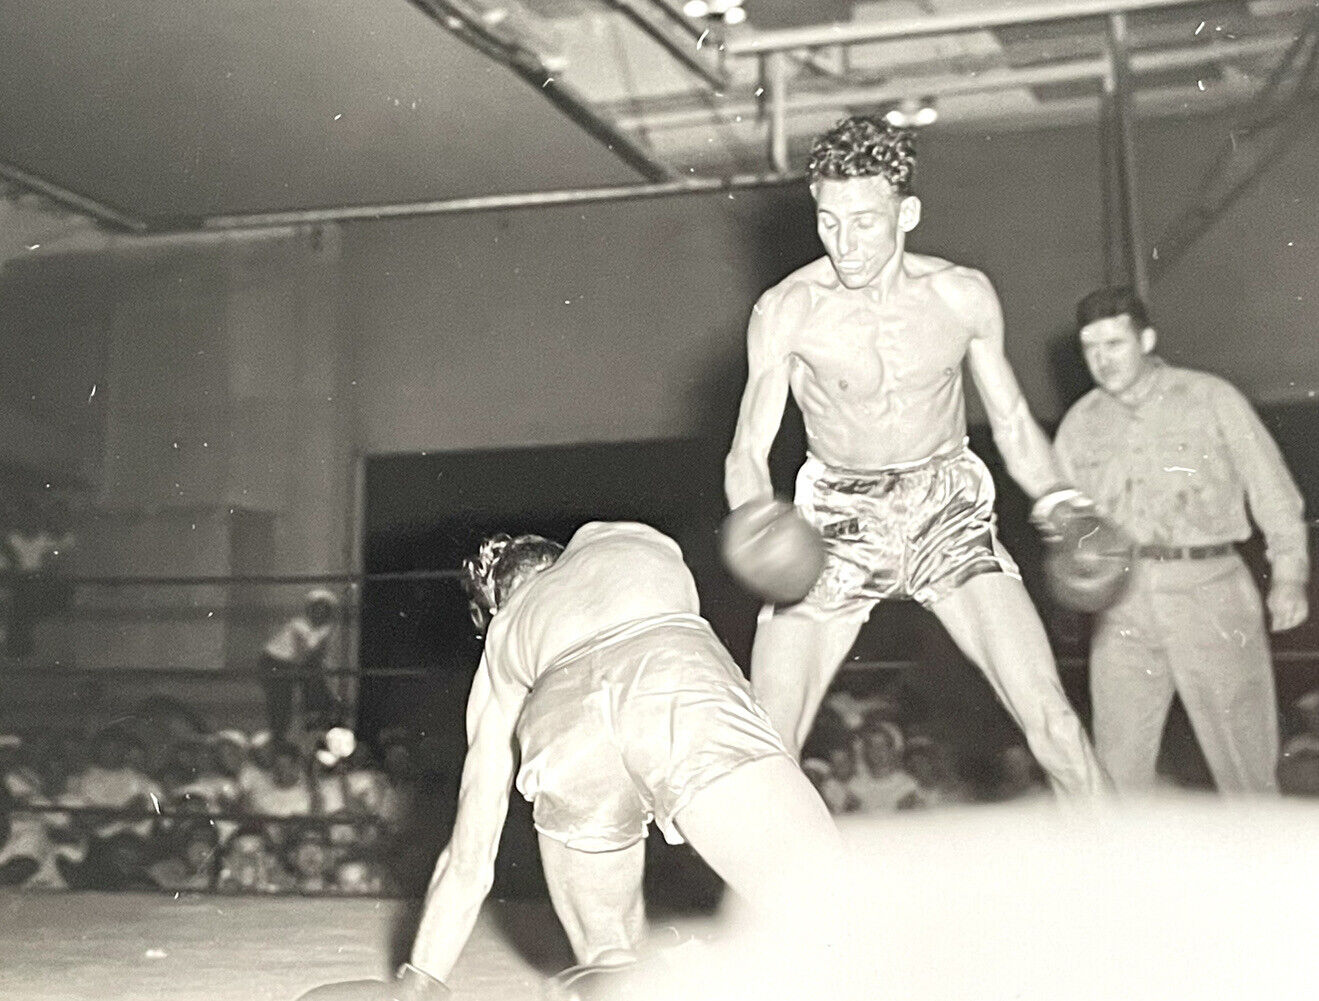 VTG 1950s Photo Sexy SHIRTLESS RIPPED MUSCLE MEN In Boxing Ring  Smooth Gay int